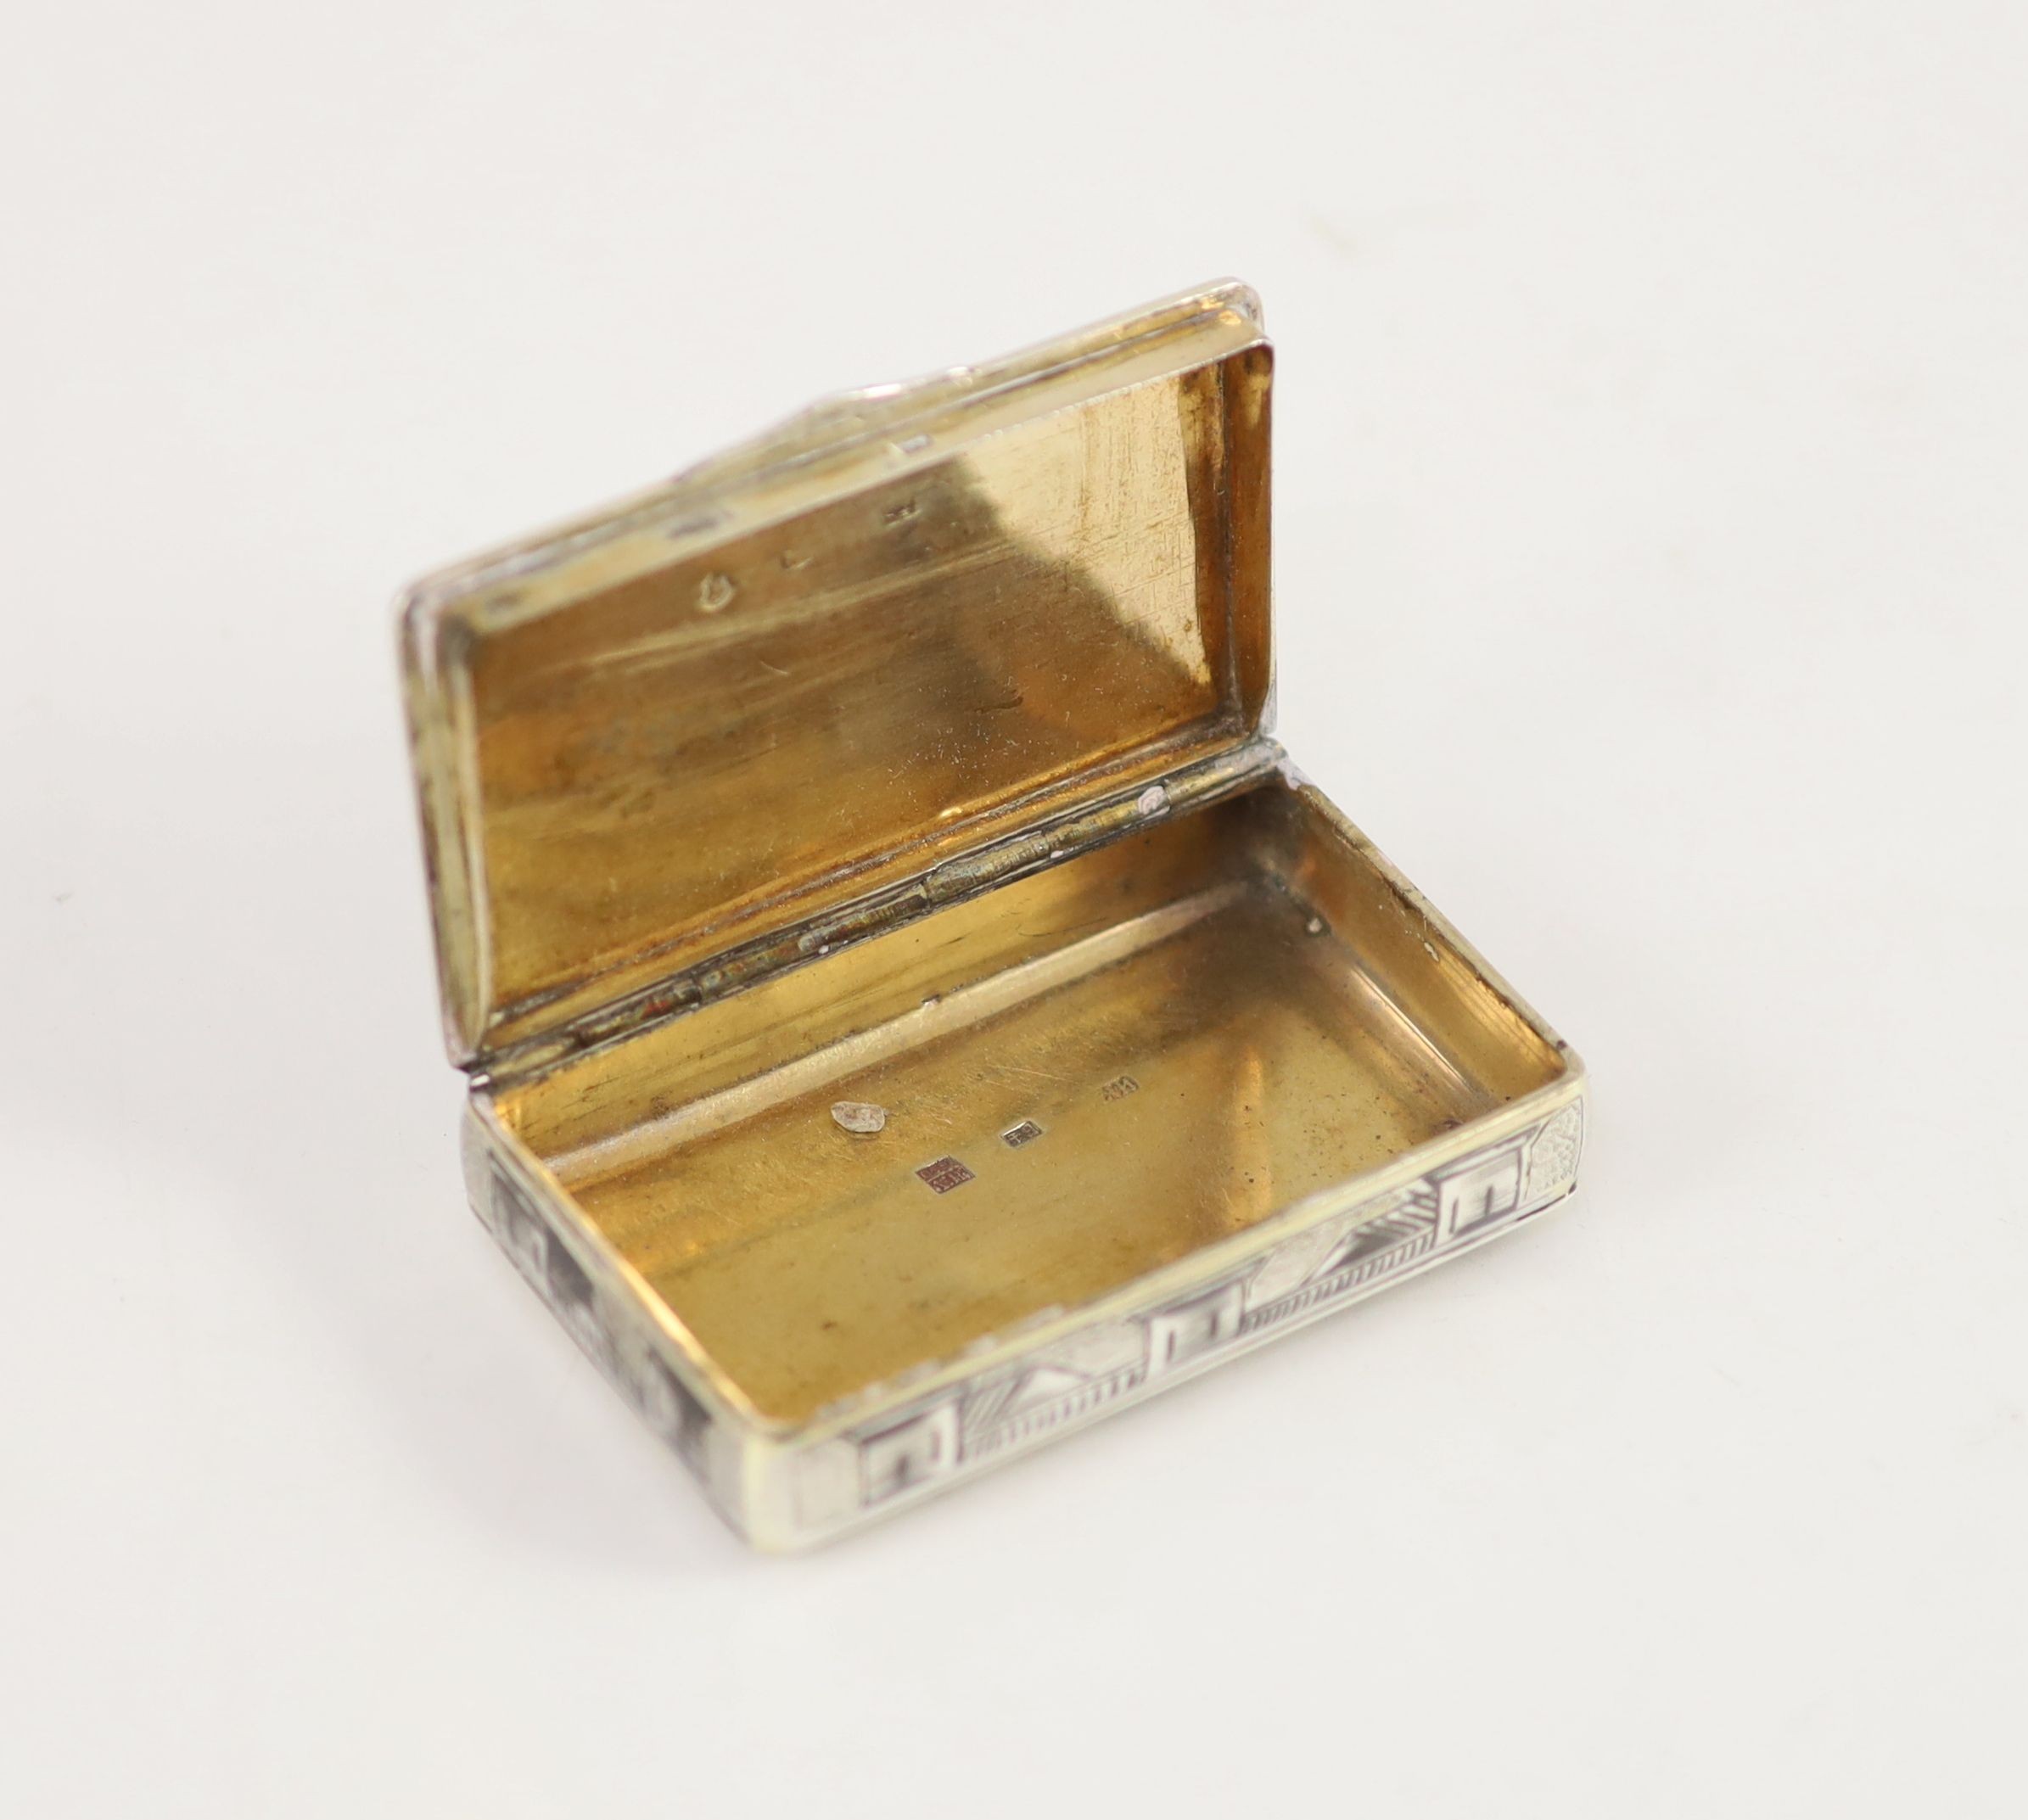 An early 19th century Russian 84 zolotnik parcel gilt silver and niello snuff box, assay master possibly Nicholai Brubovin,1830